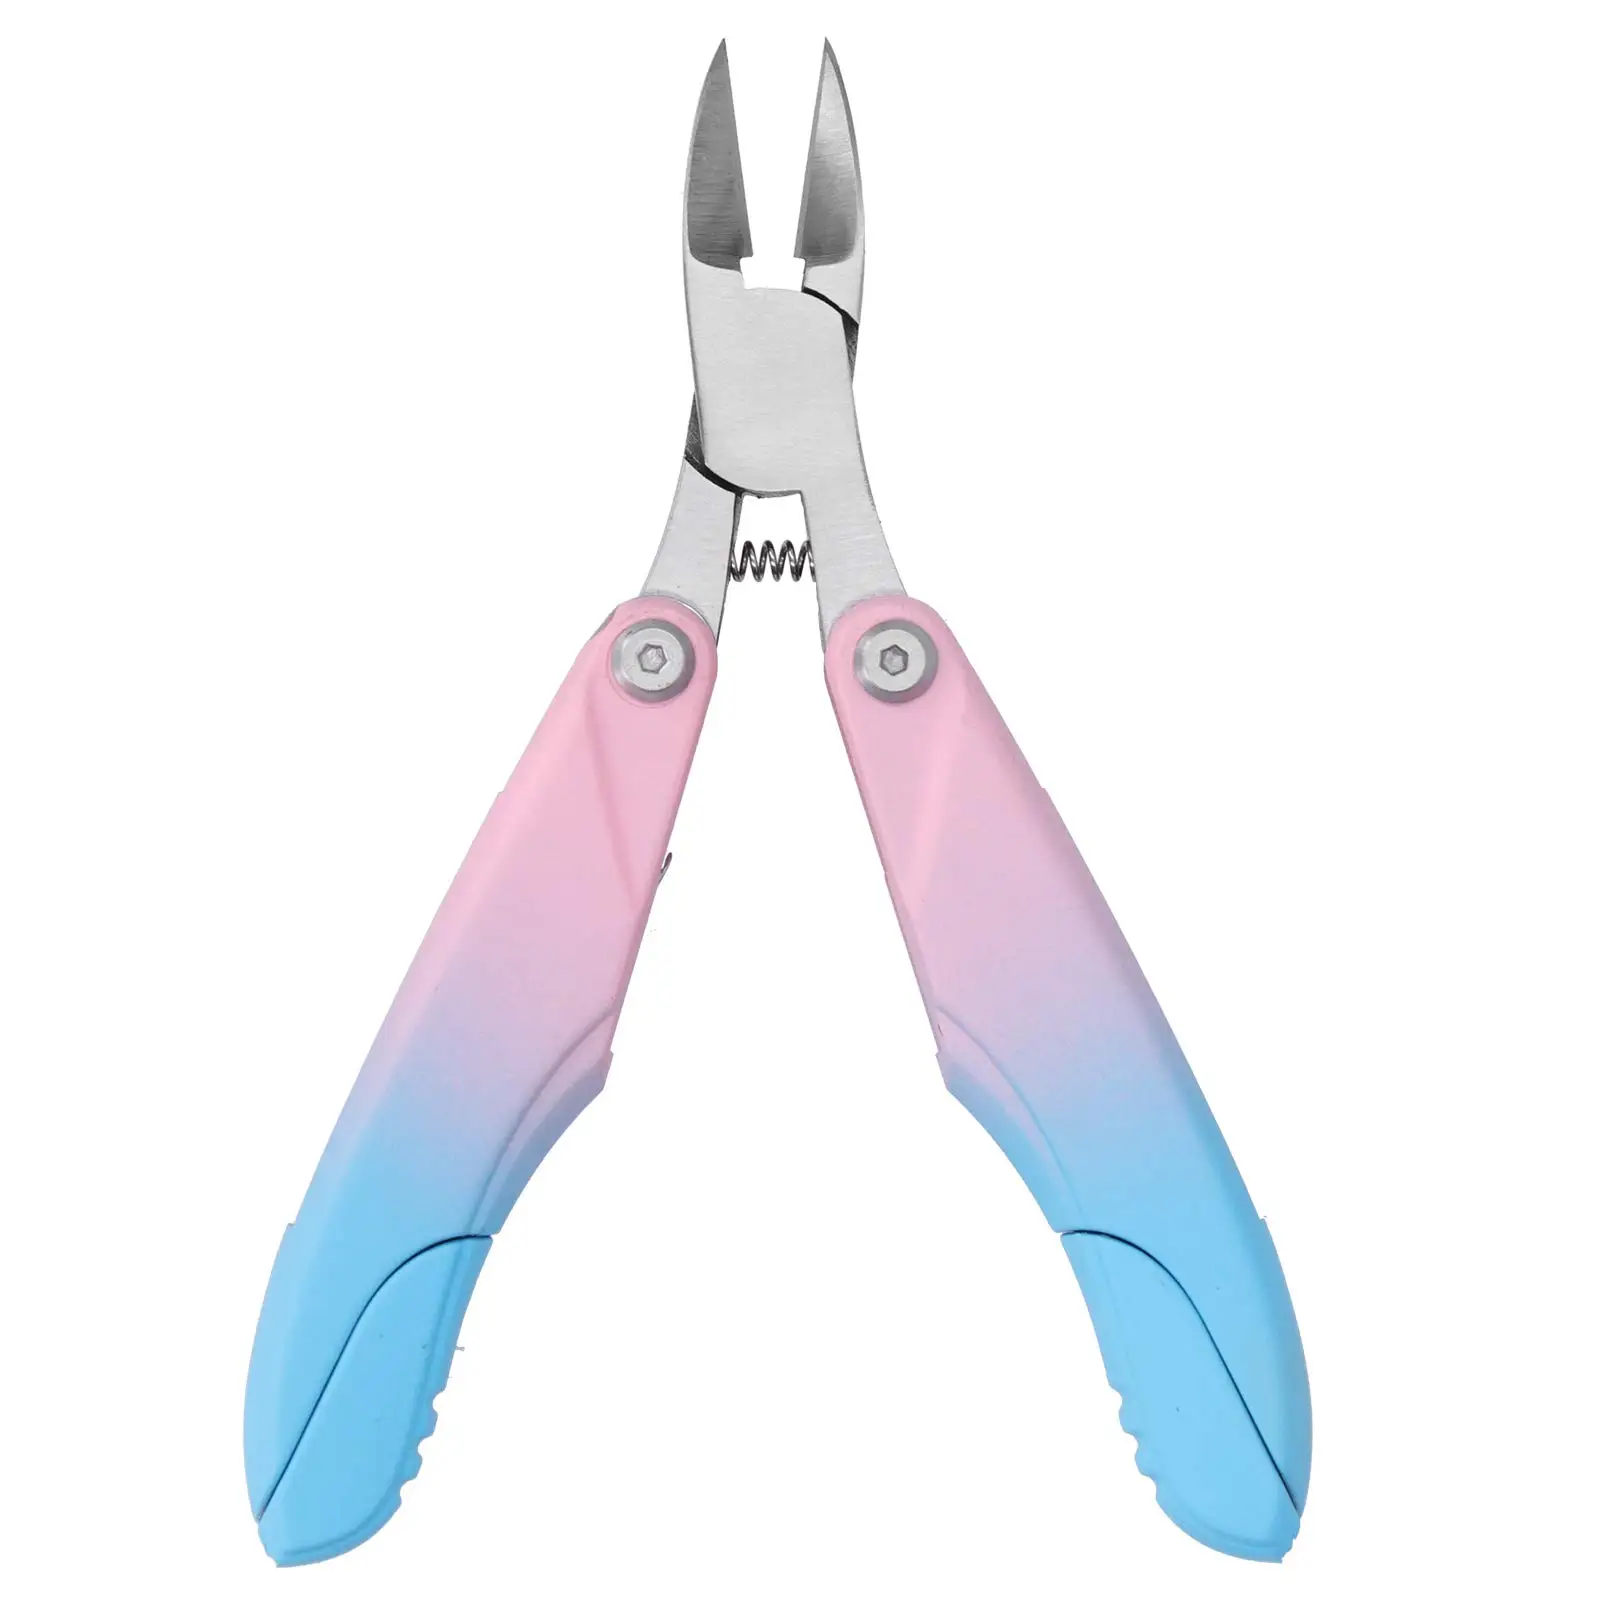 Ingrown Toe Nail Clipper for Thick Toenails Paronychia Multifunctional Nail Clippers Folding Olecranon Arch Ingrown Pliers